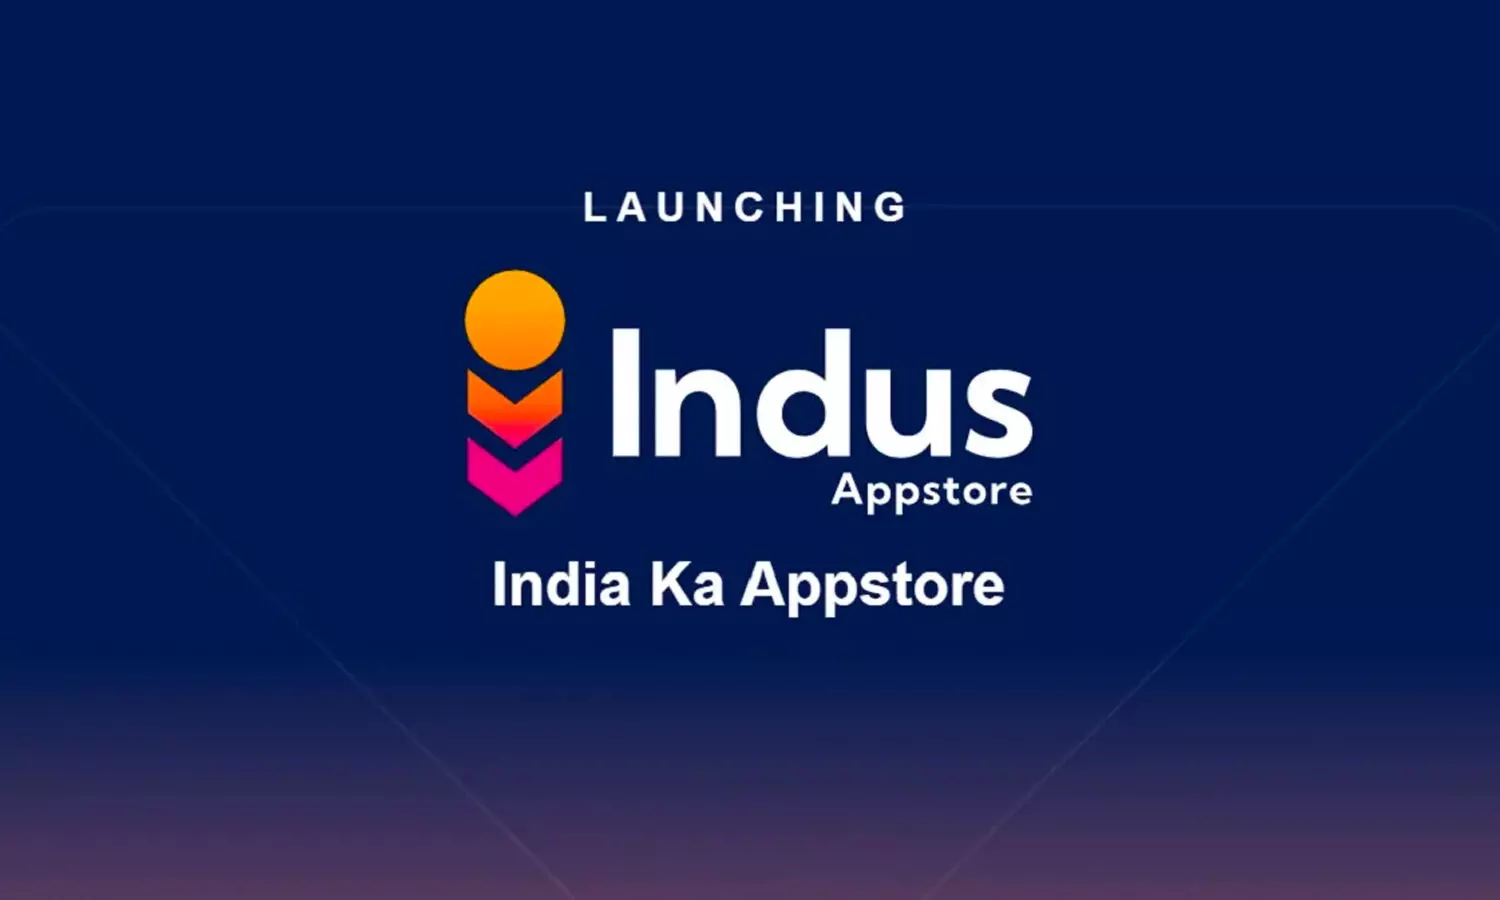 PhonePe Indus Appstore Launch